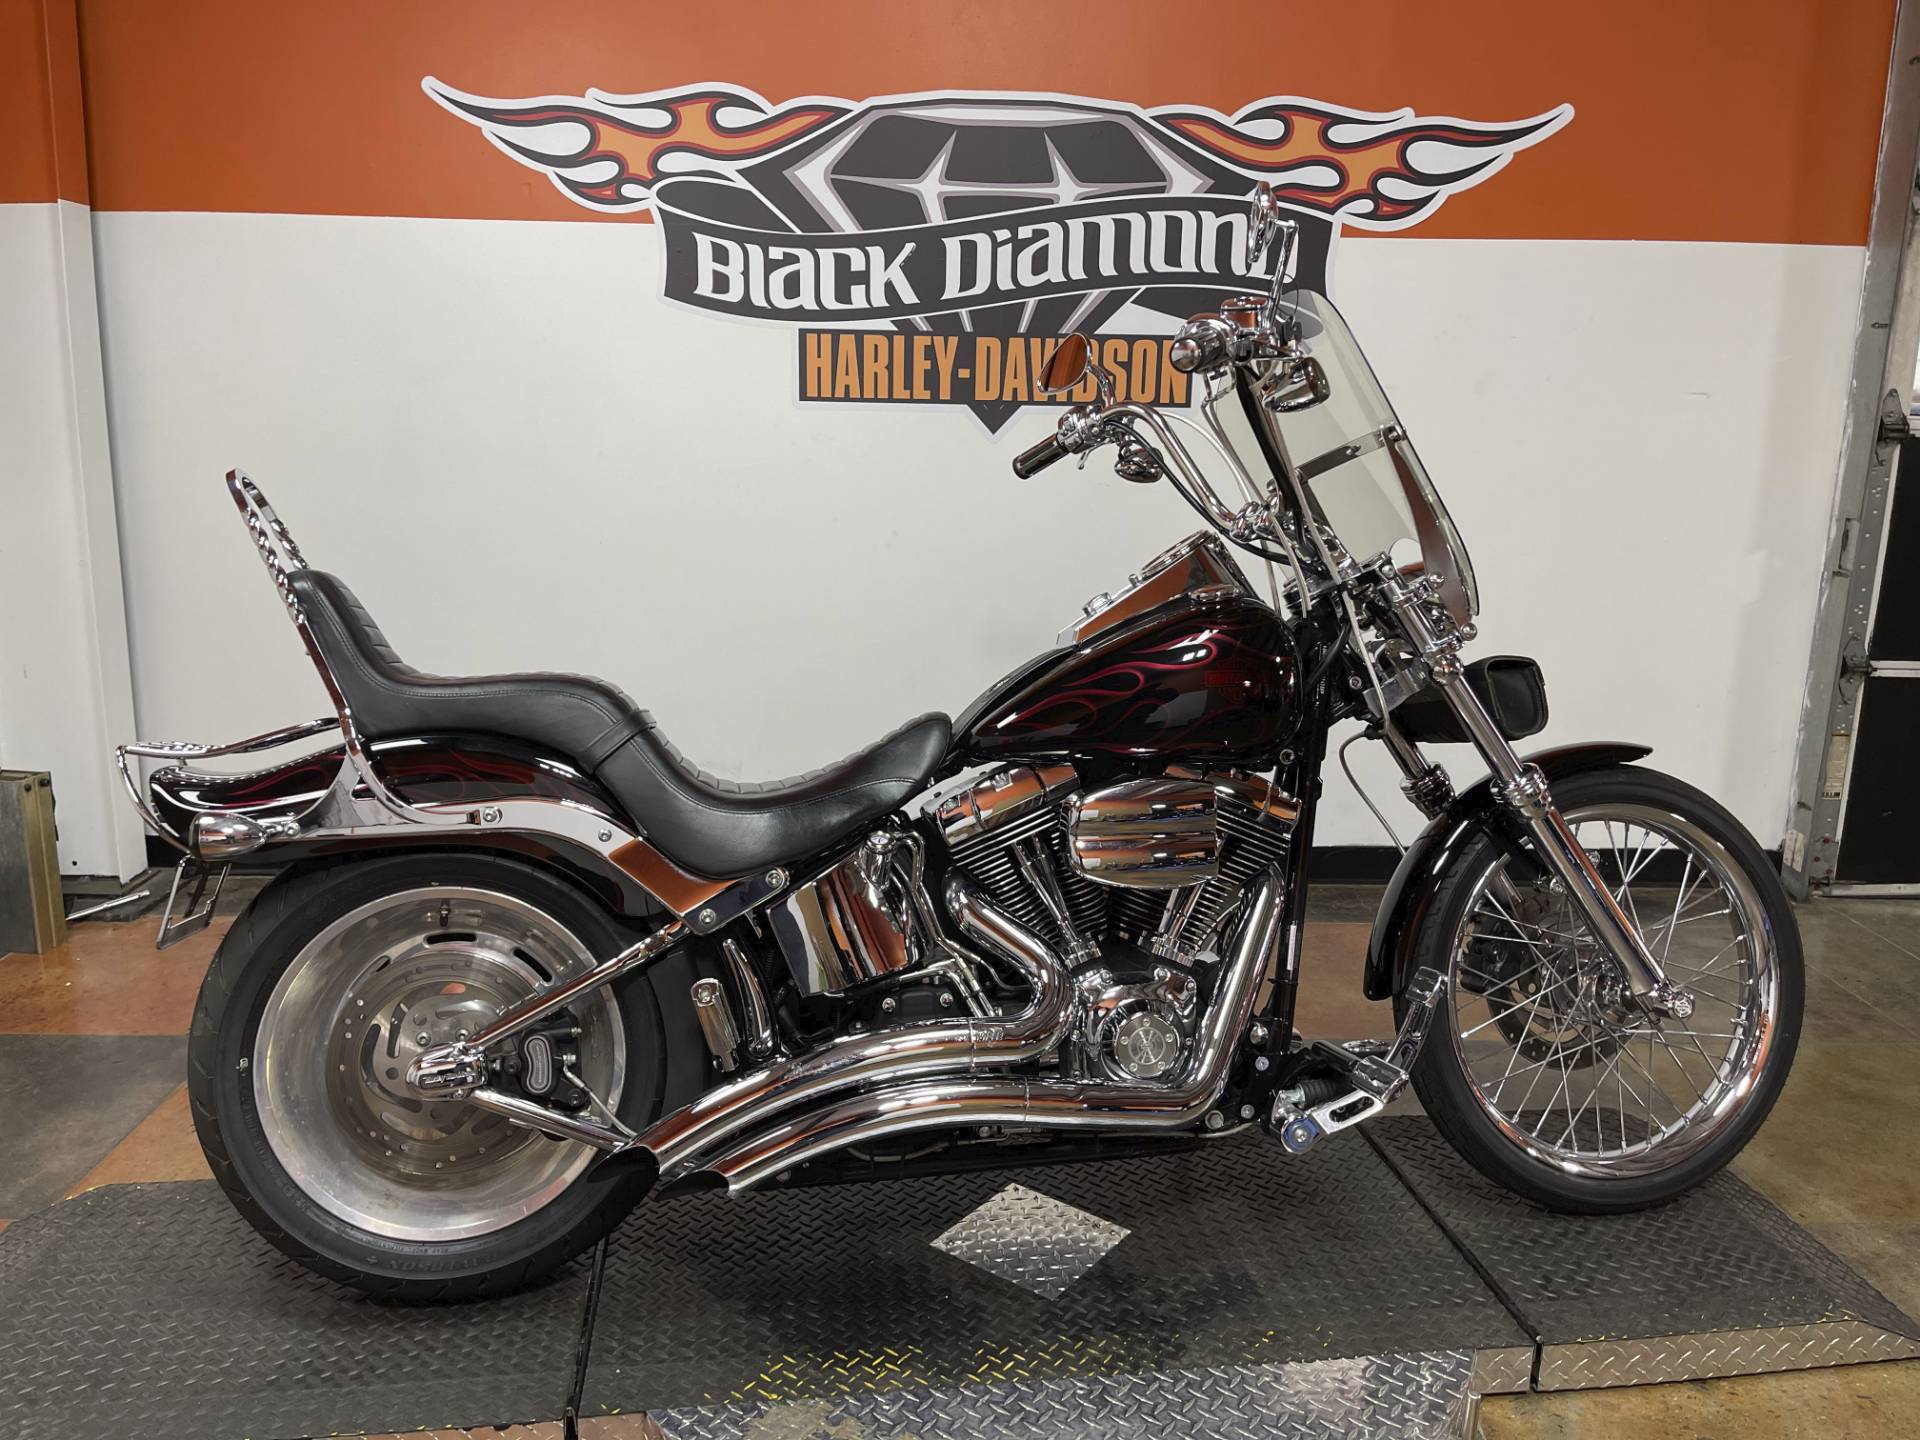 Used 2008 Harley Davidson Softail Custom Vivid Black With Red Pin Stripe Motorcycles In Marion Il U024286